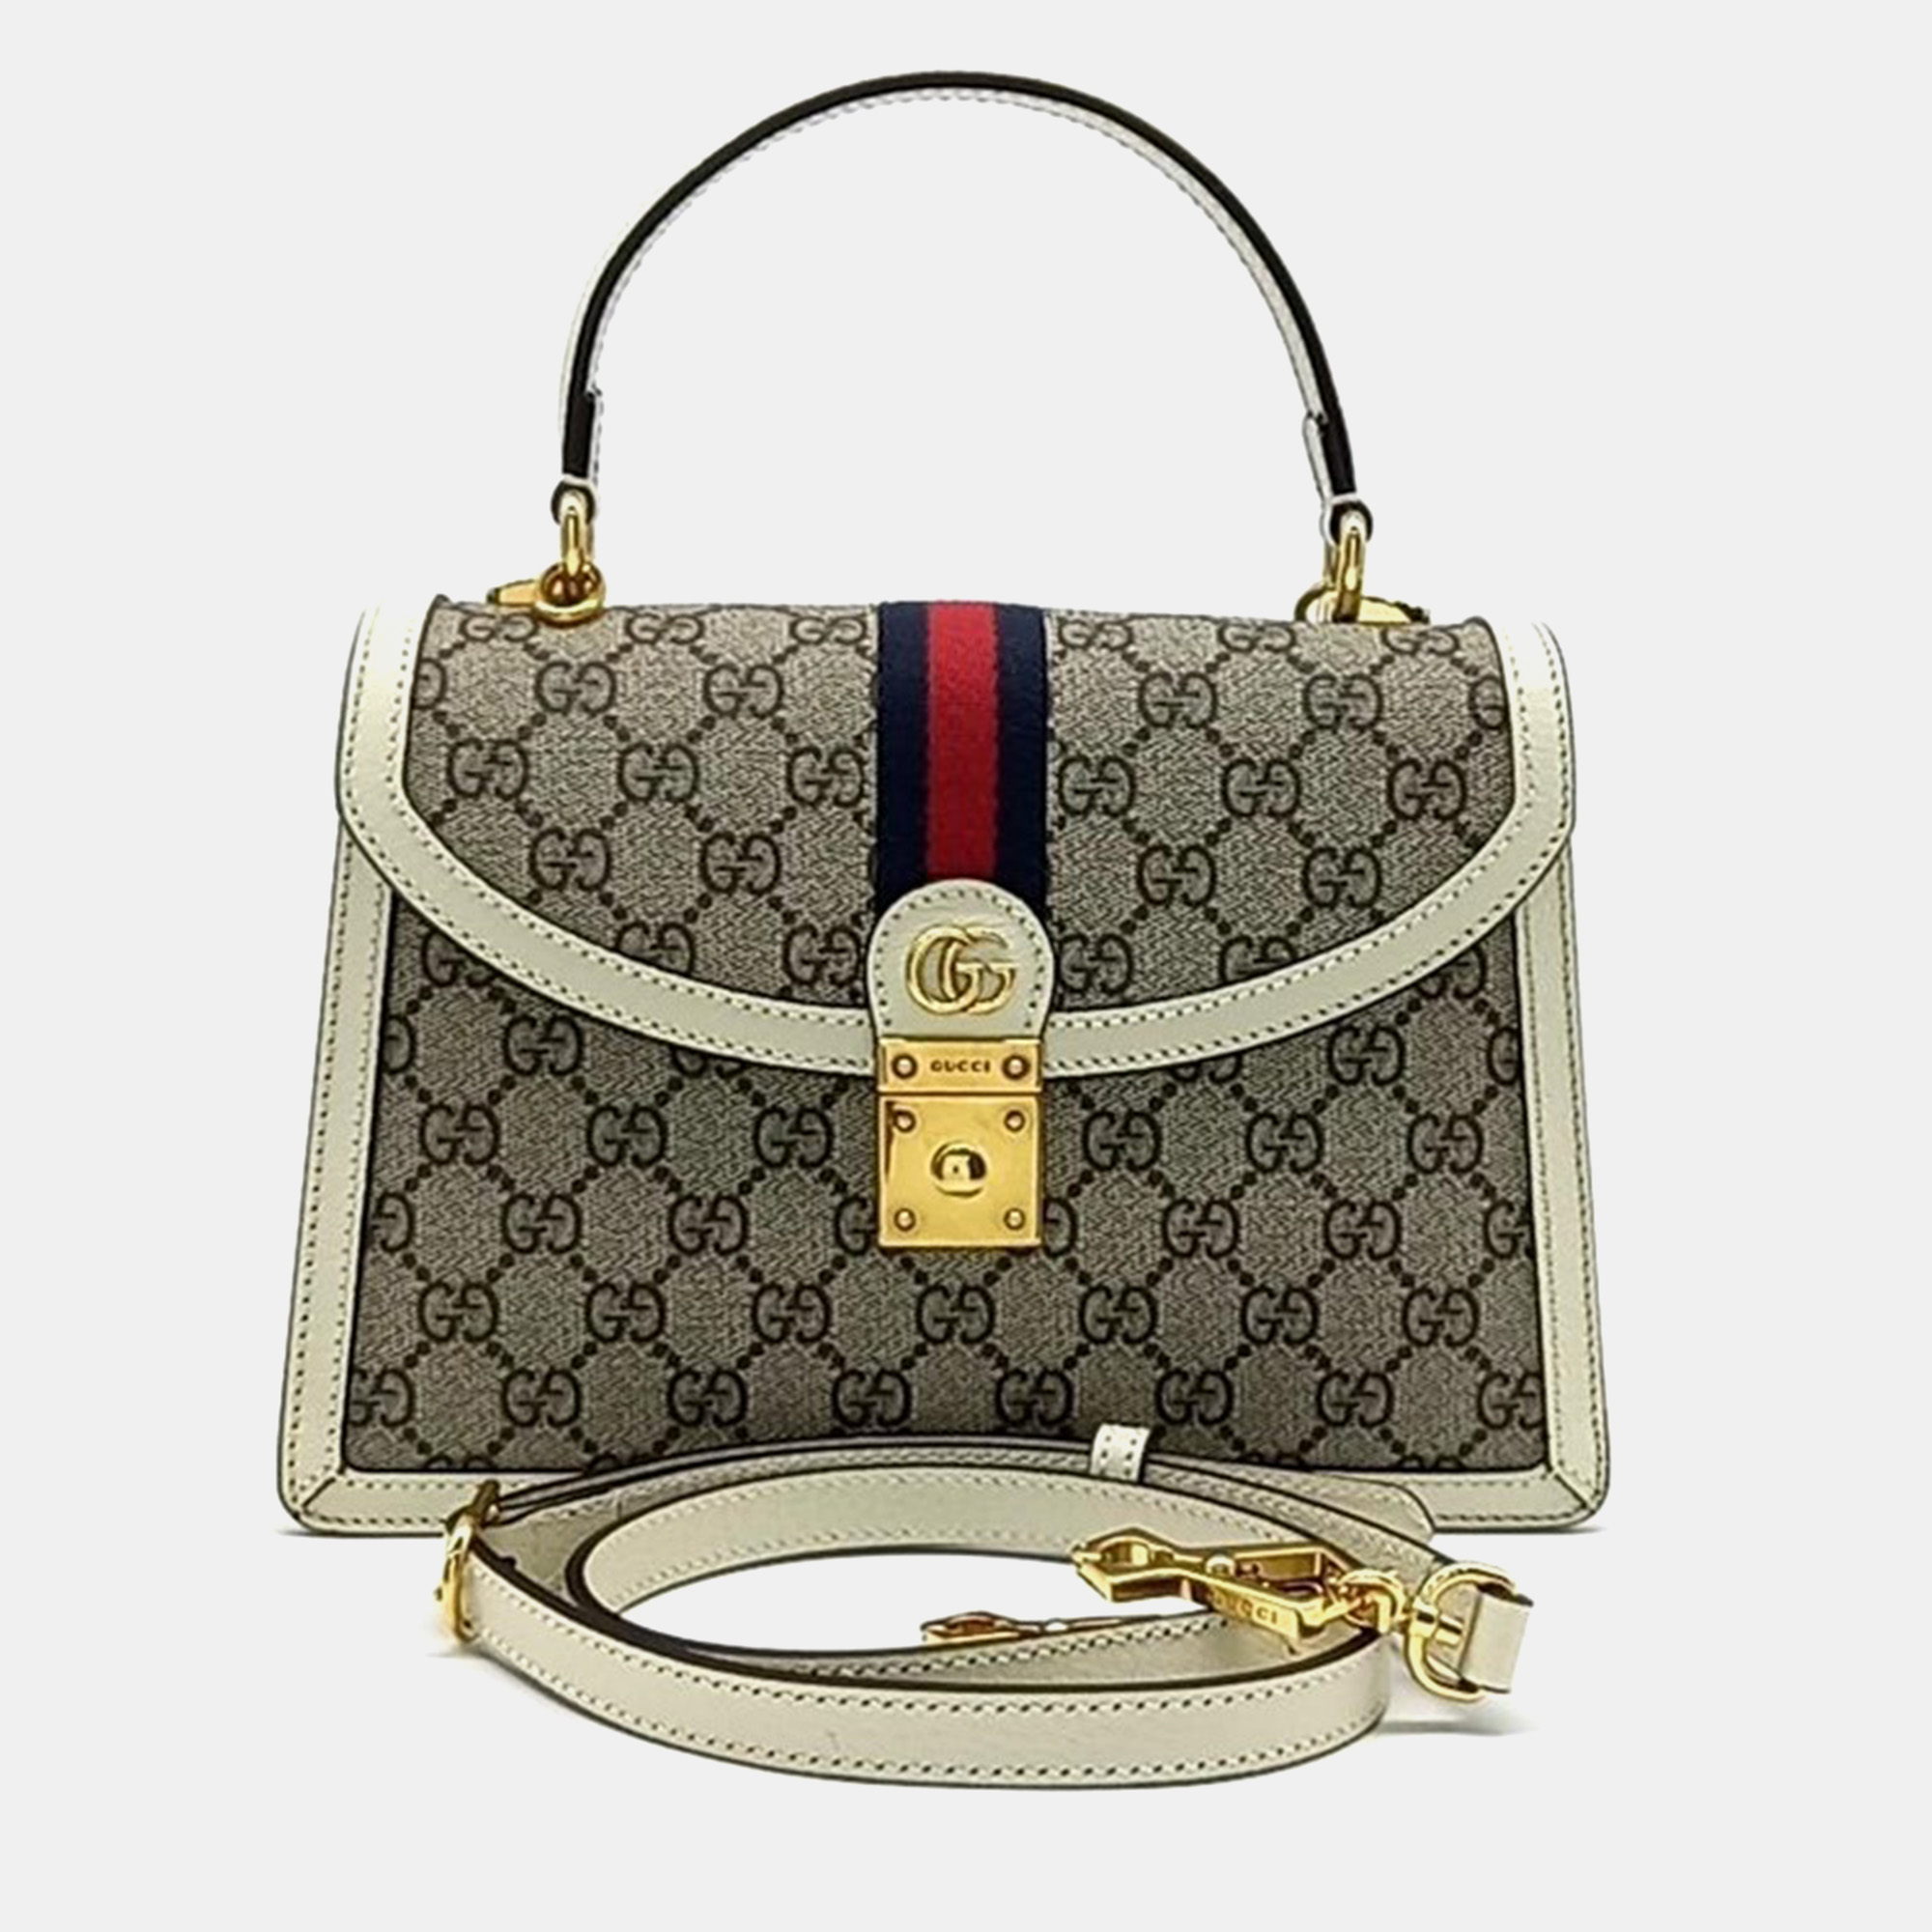 Gucci ophidia top handle bag